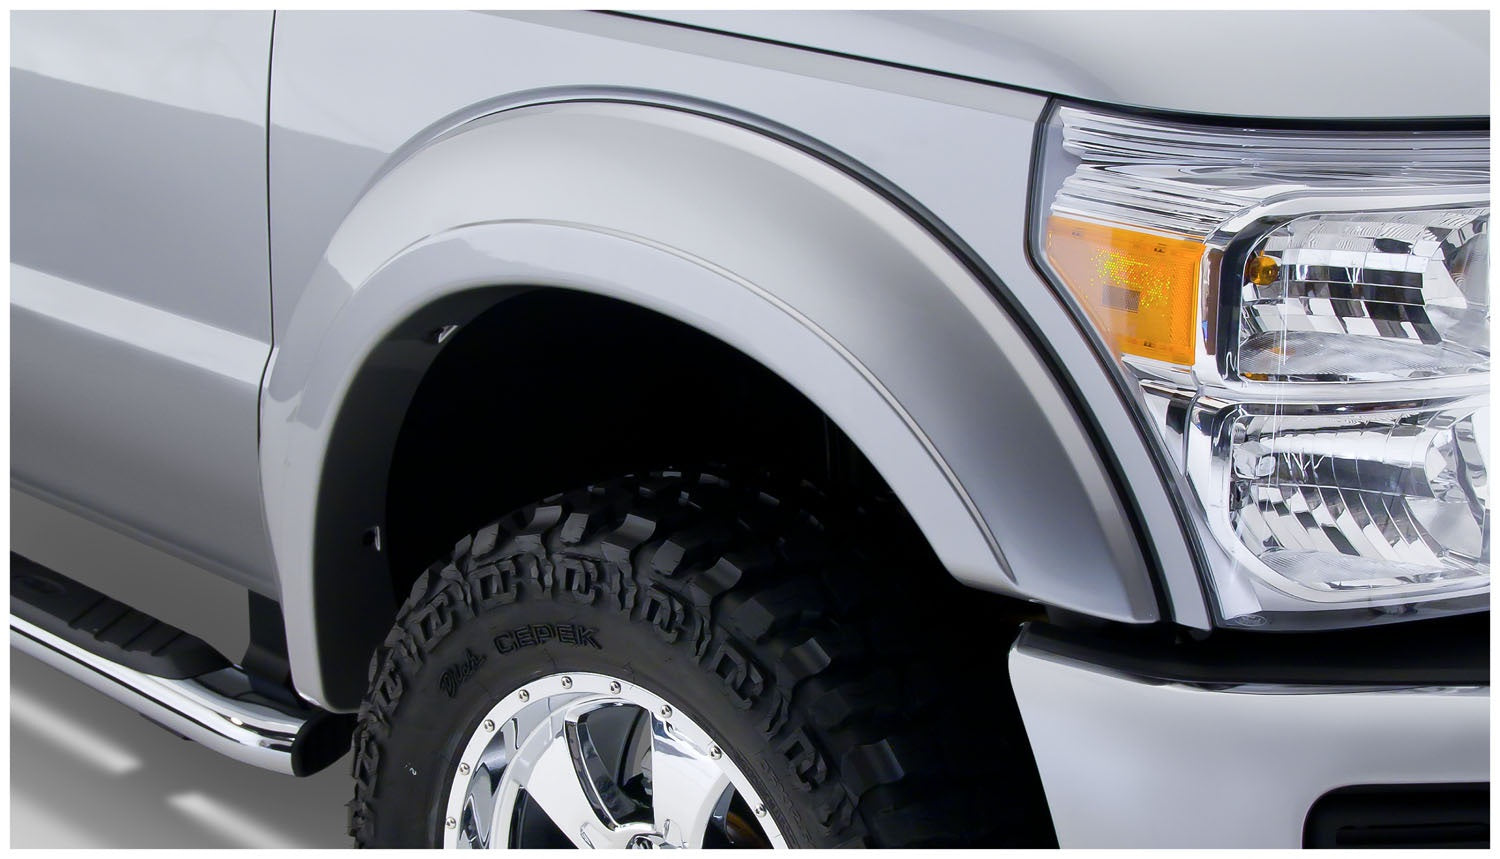 Bushwacker 20085-02 Black Extend-A-Fender Style Smooth Finish Front Fender Flares for 2011-2016 Ford F-250 & F-350 Super Duty (Excludes Dually)